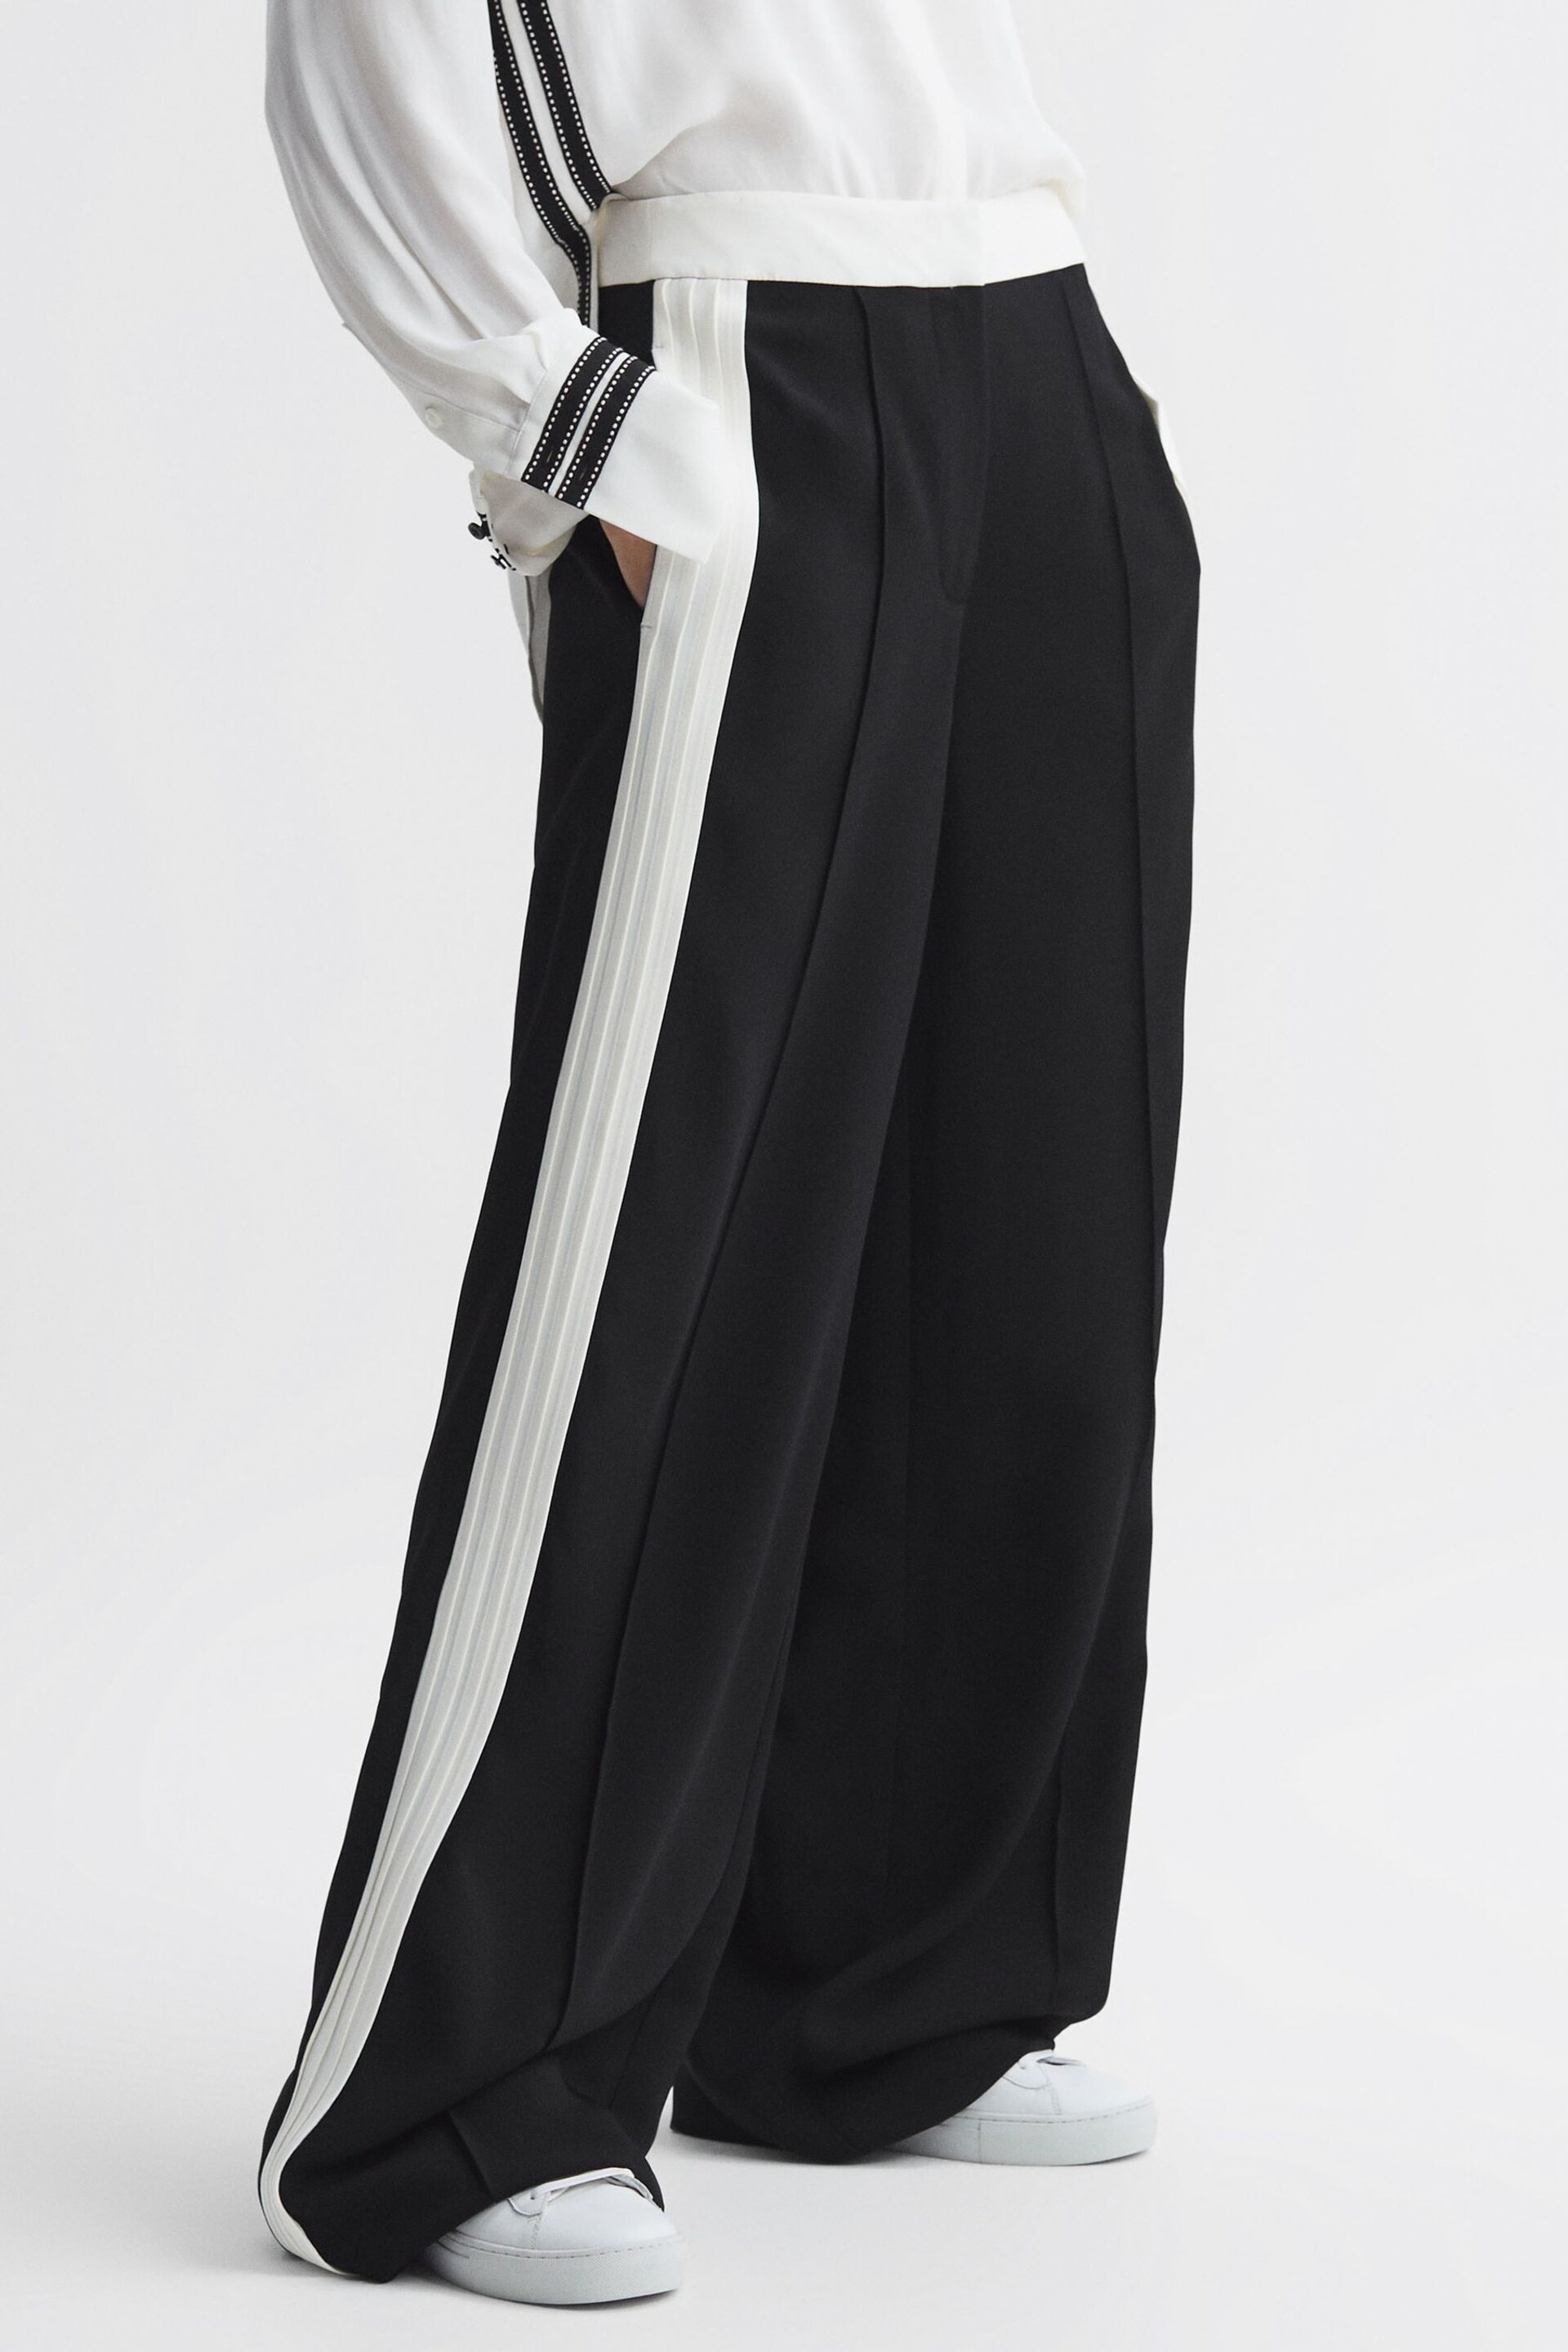 Reiss Black Bryn Contrast Waistband Pintuck Trousers - Image 1 of 6